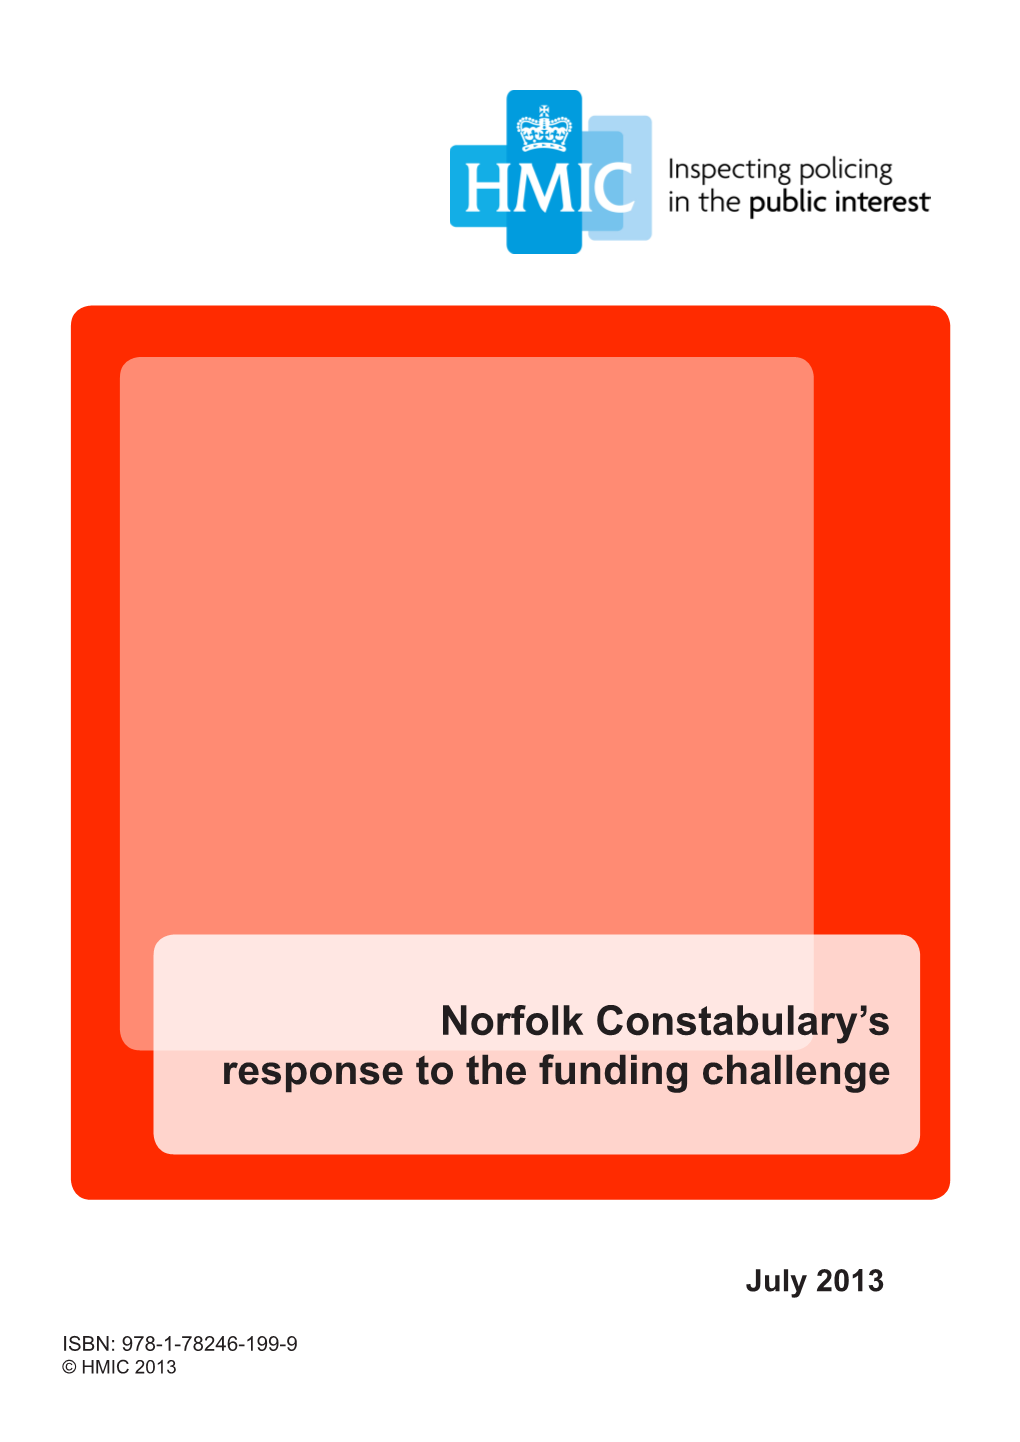 Norfolk Constabulary's Response to the Funding Challenge